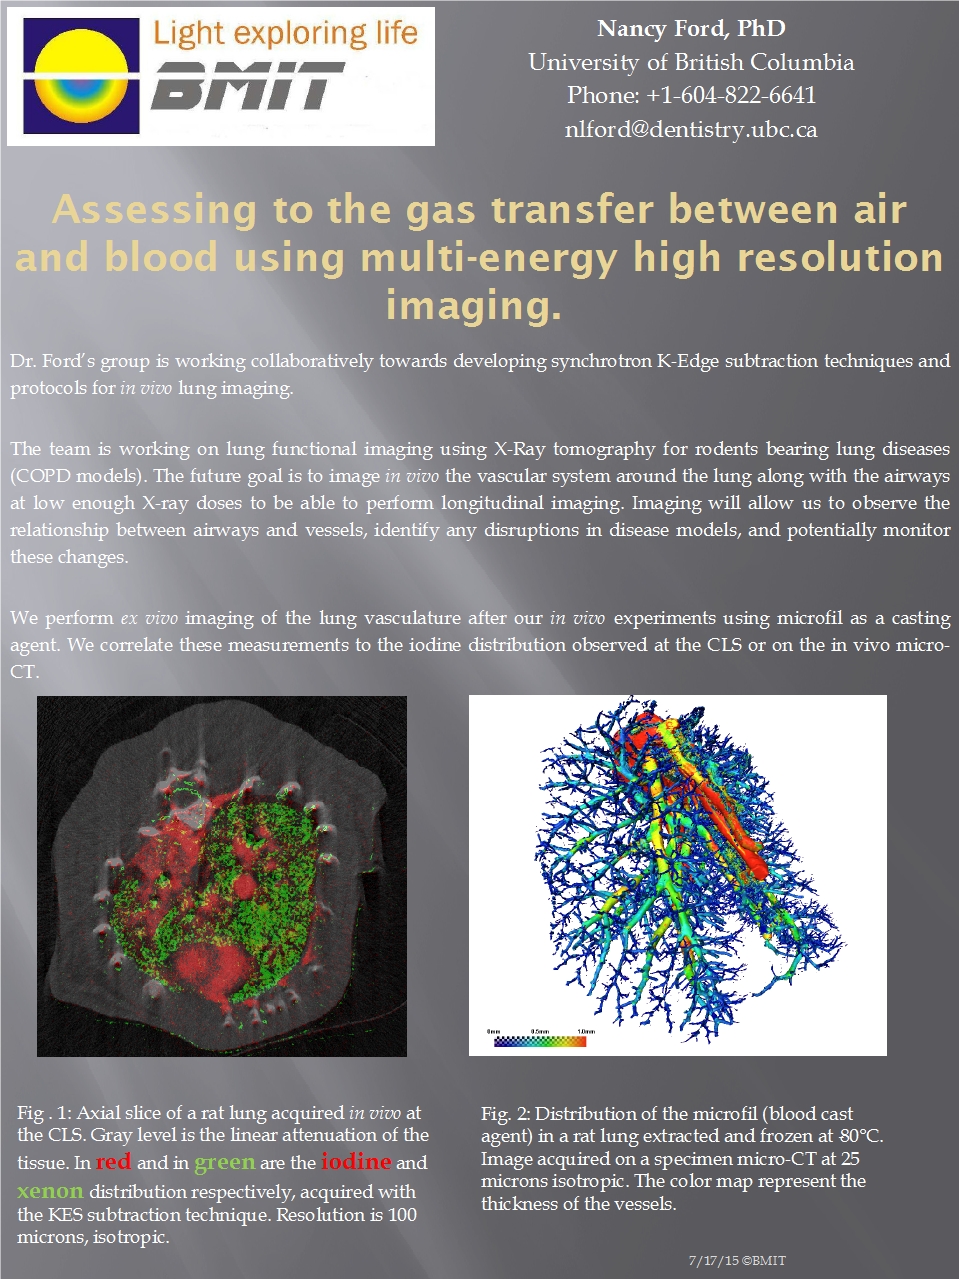 Assessing the Gas Transfer between Air and Blood Using Multi-Energy High Resolution Imaging Image